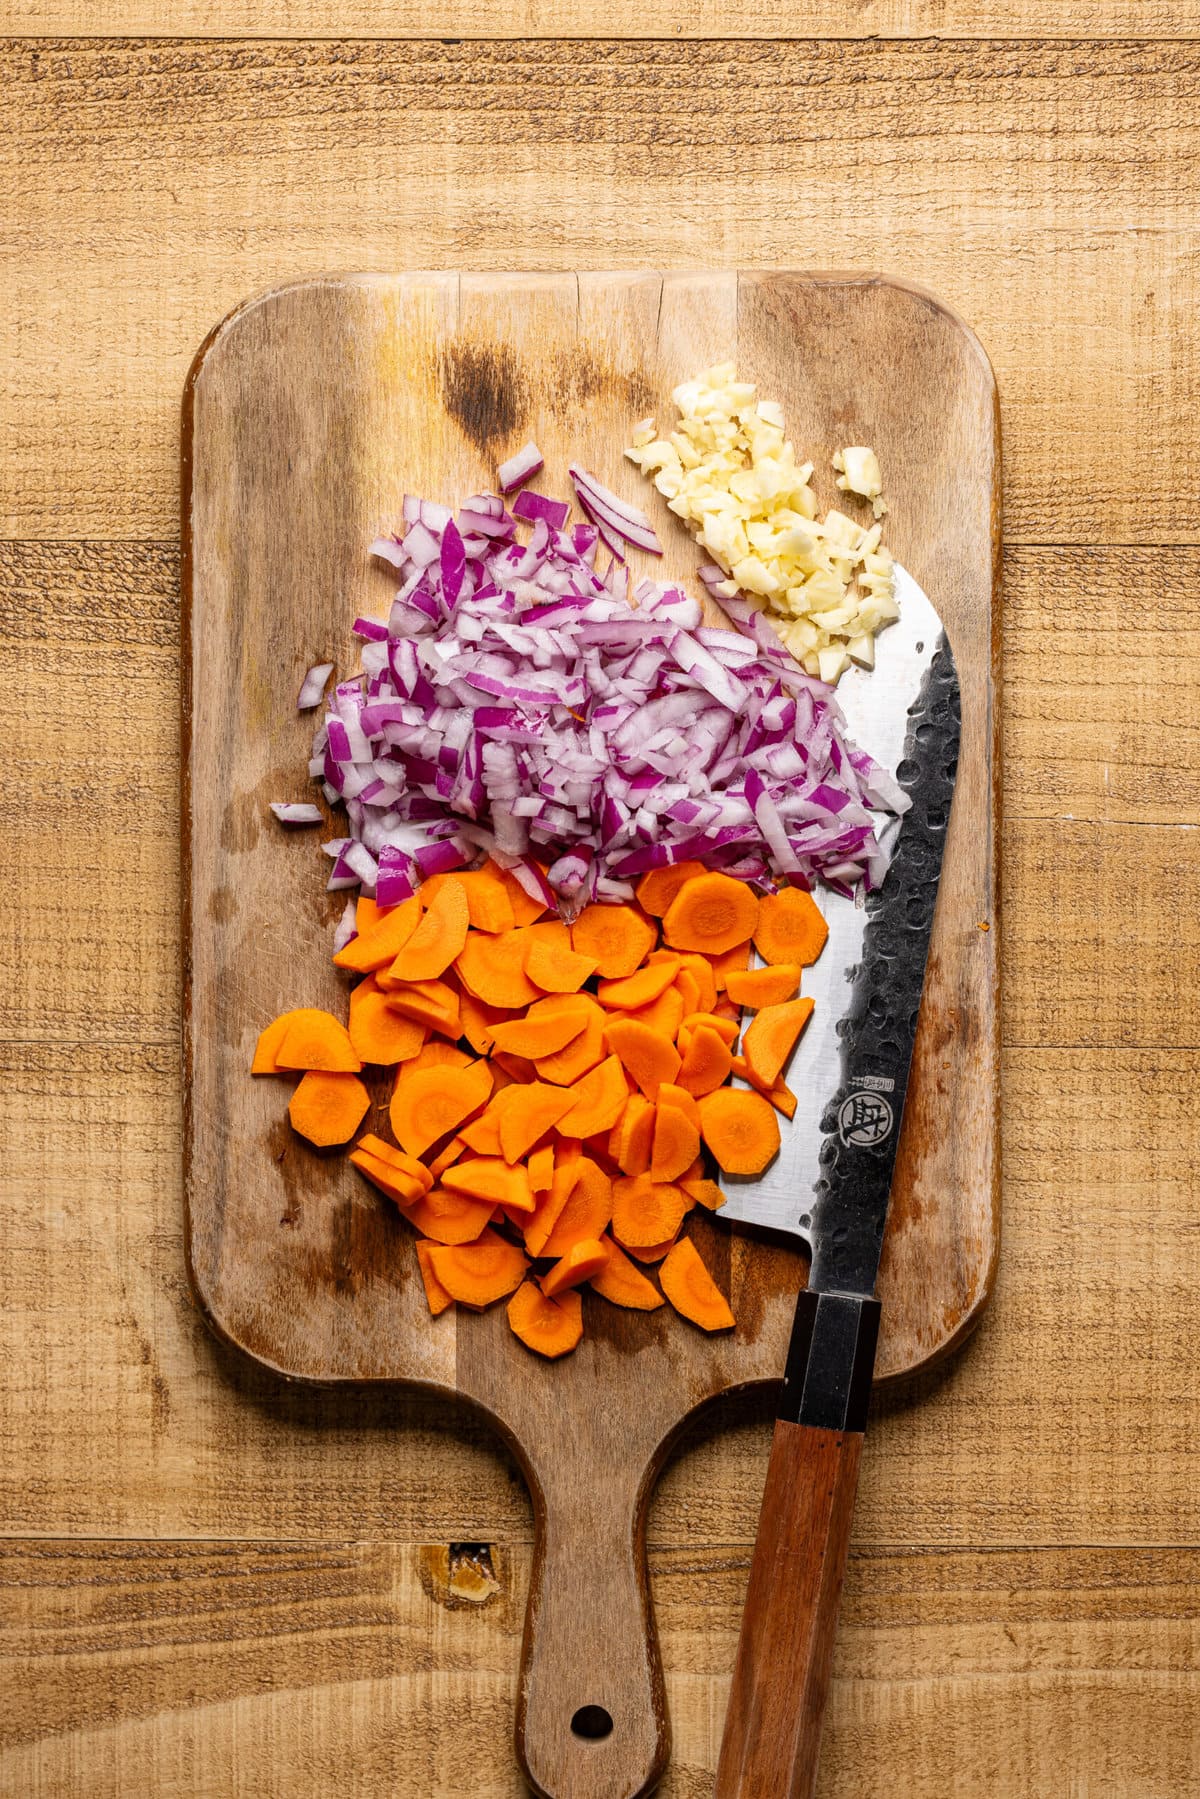 Chopped veggies on a cutting board with a knife. 